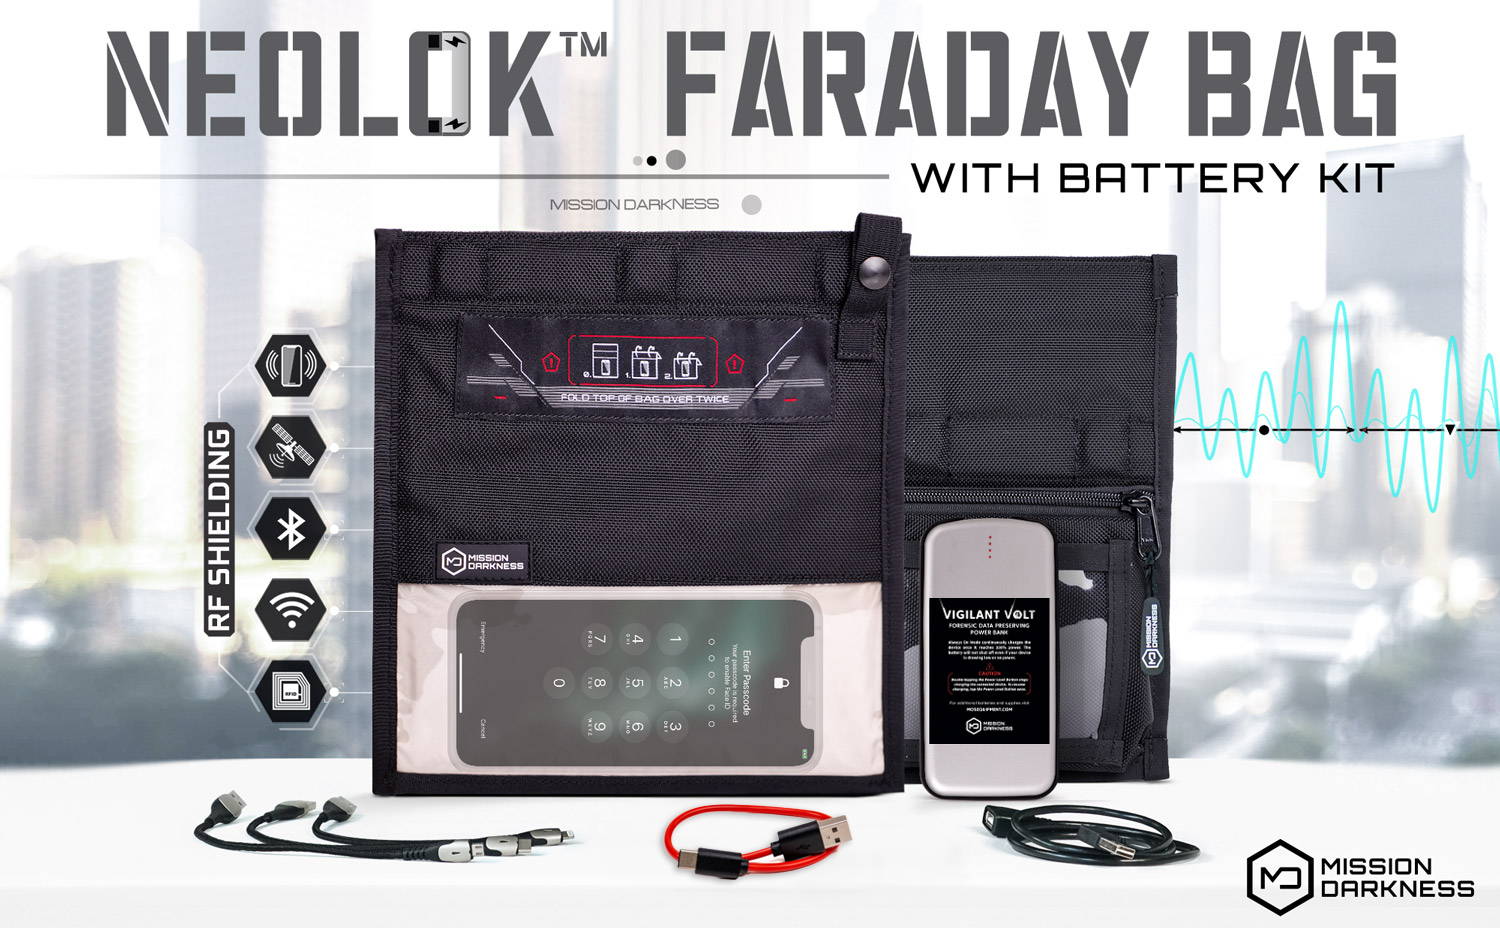 Mission Darkness NeoLok Faraday Bag with Battery Kit Keeps Devices Live and Shielded